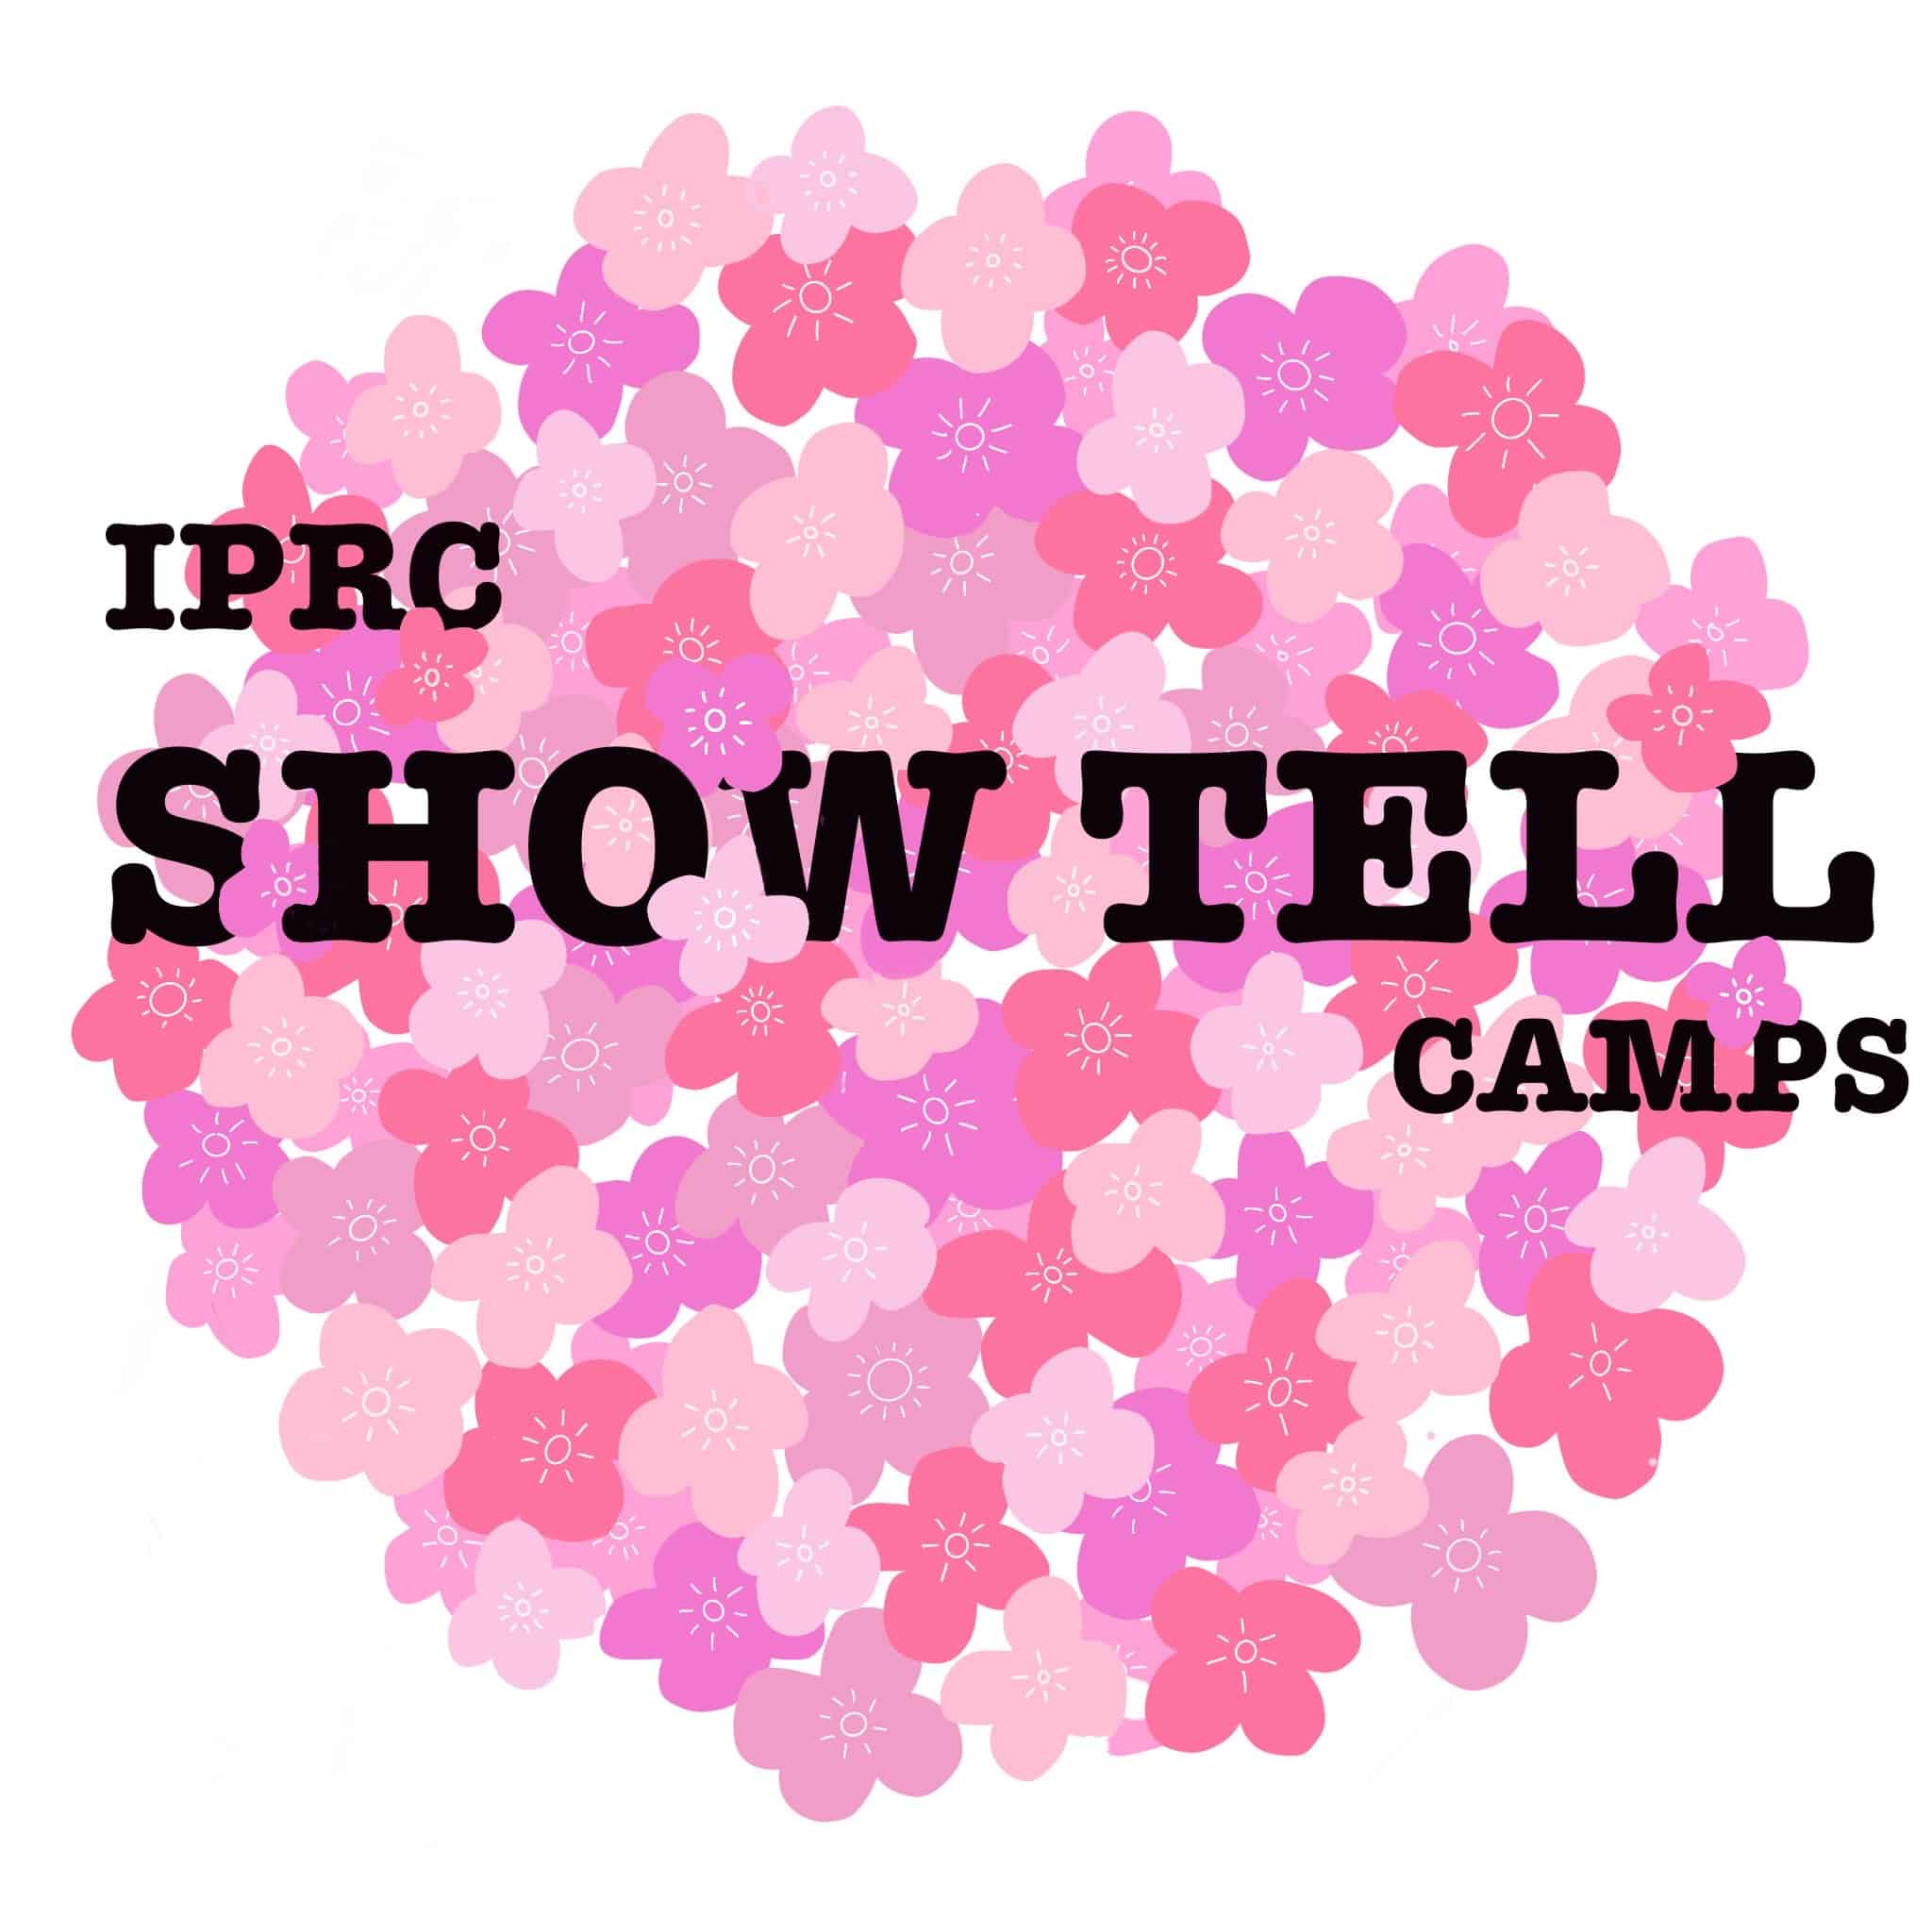 IPRC Show:Tell Camps